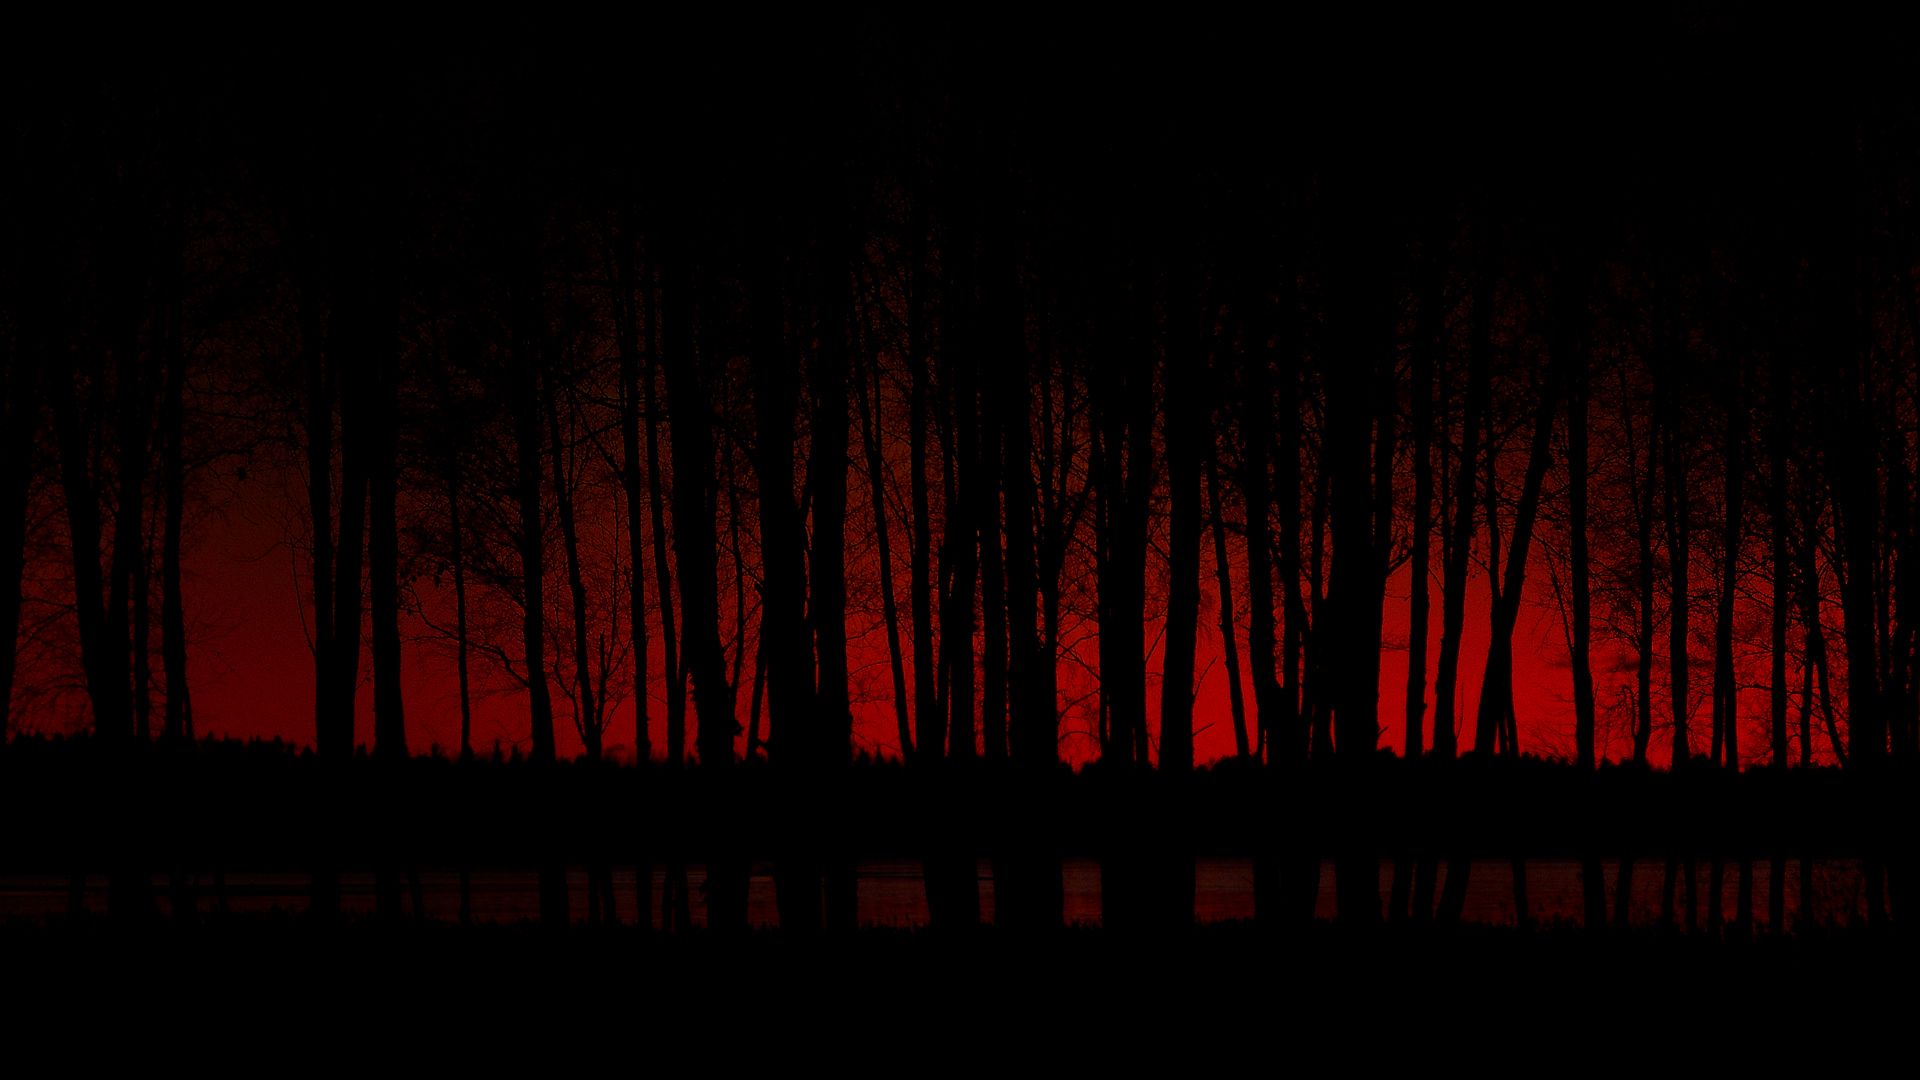 Red Computer Backgrounds posted by John Peltier